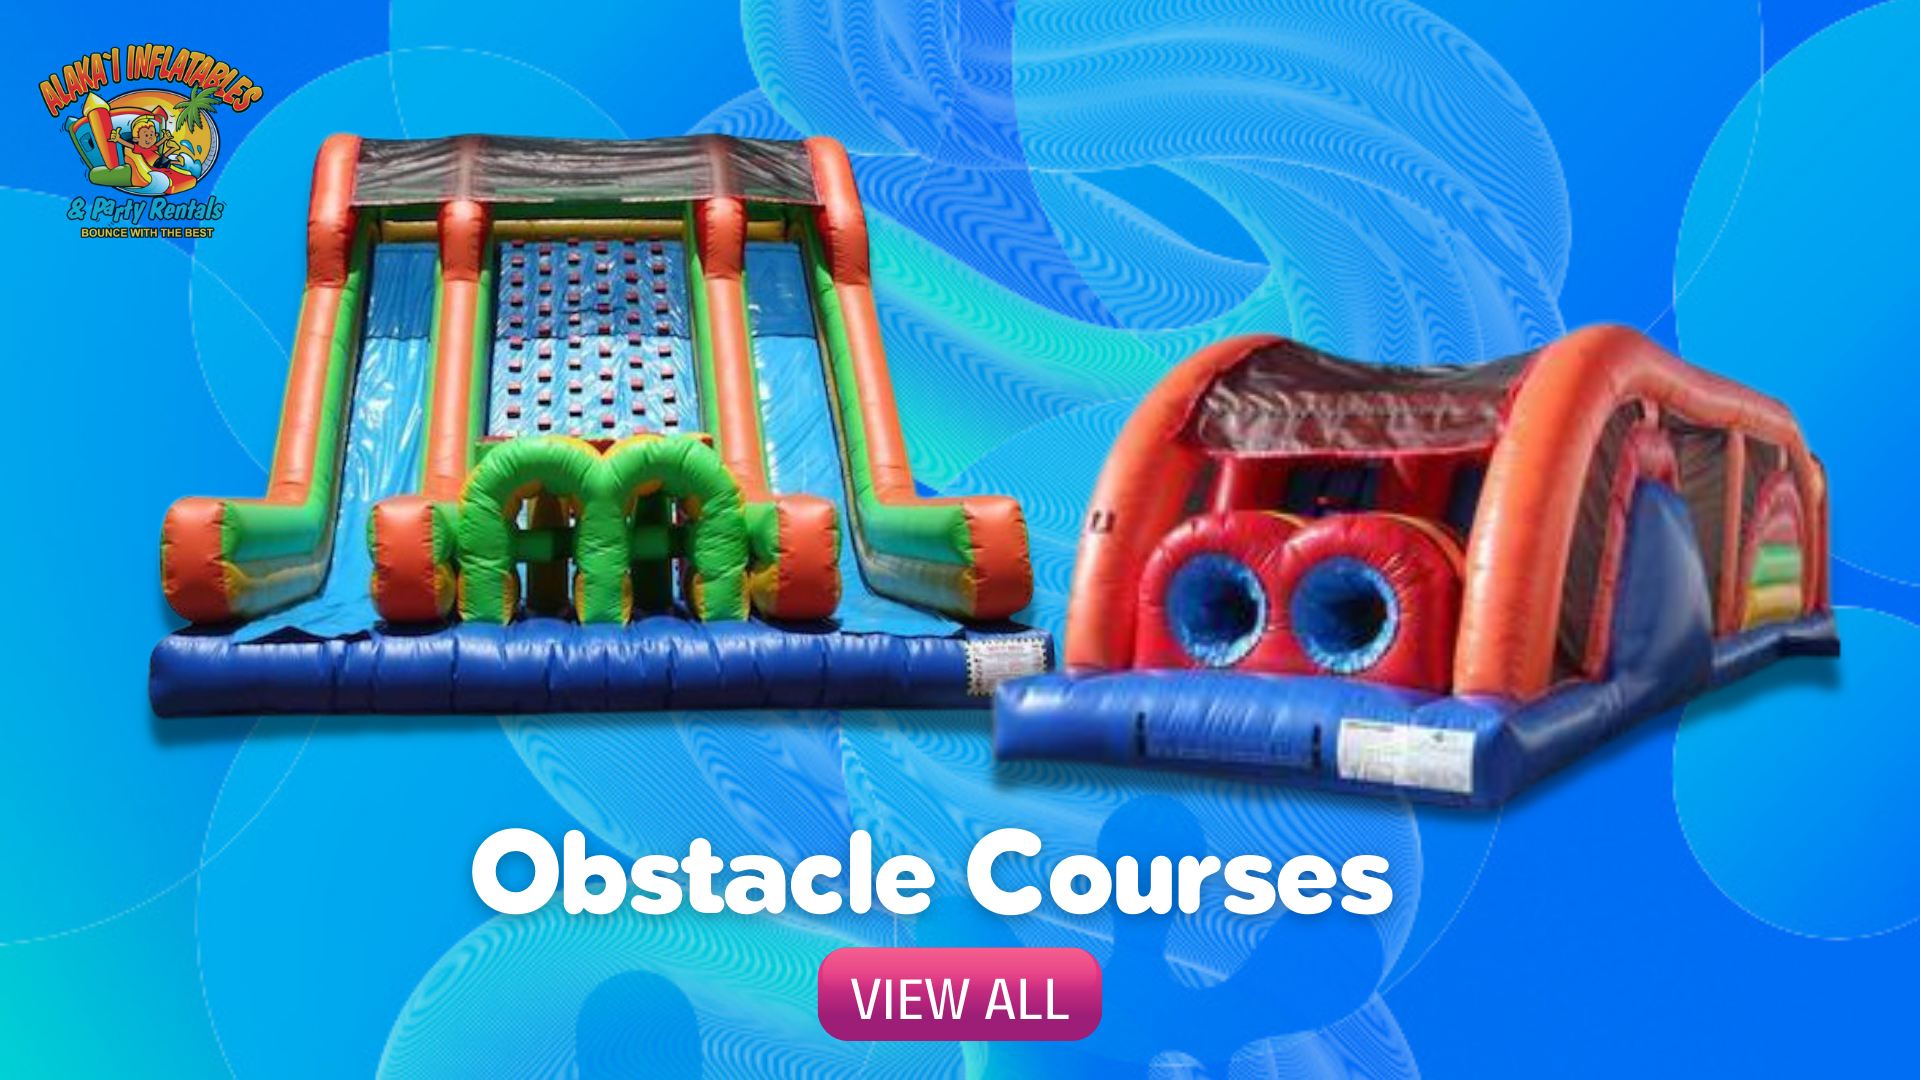 Oahu's Obstacle Course Rental